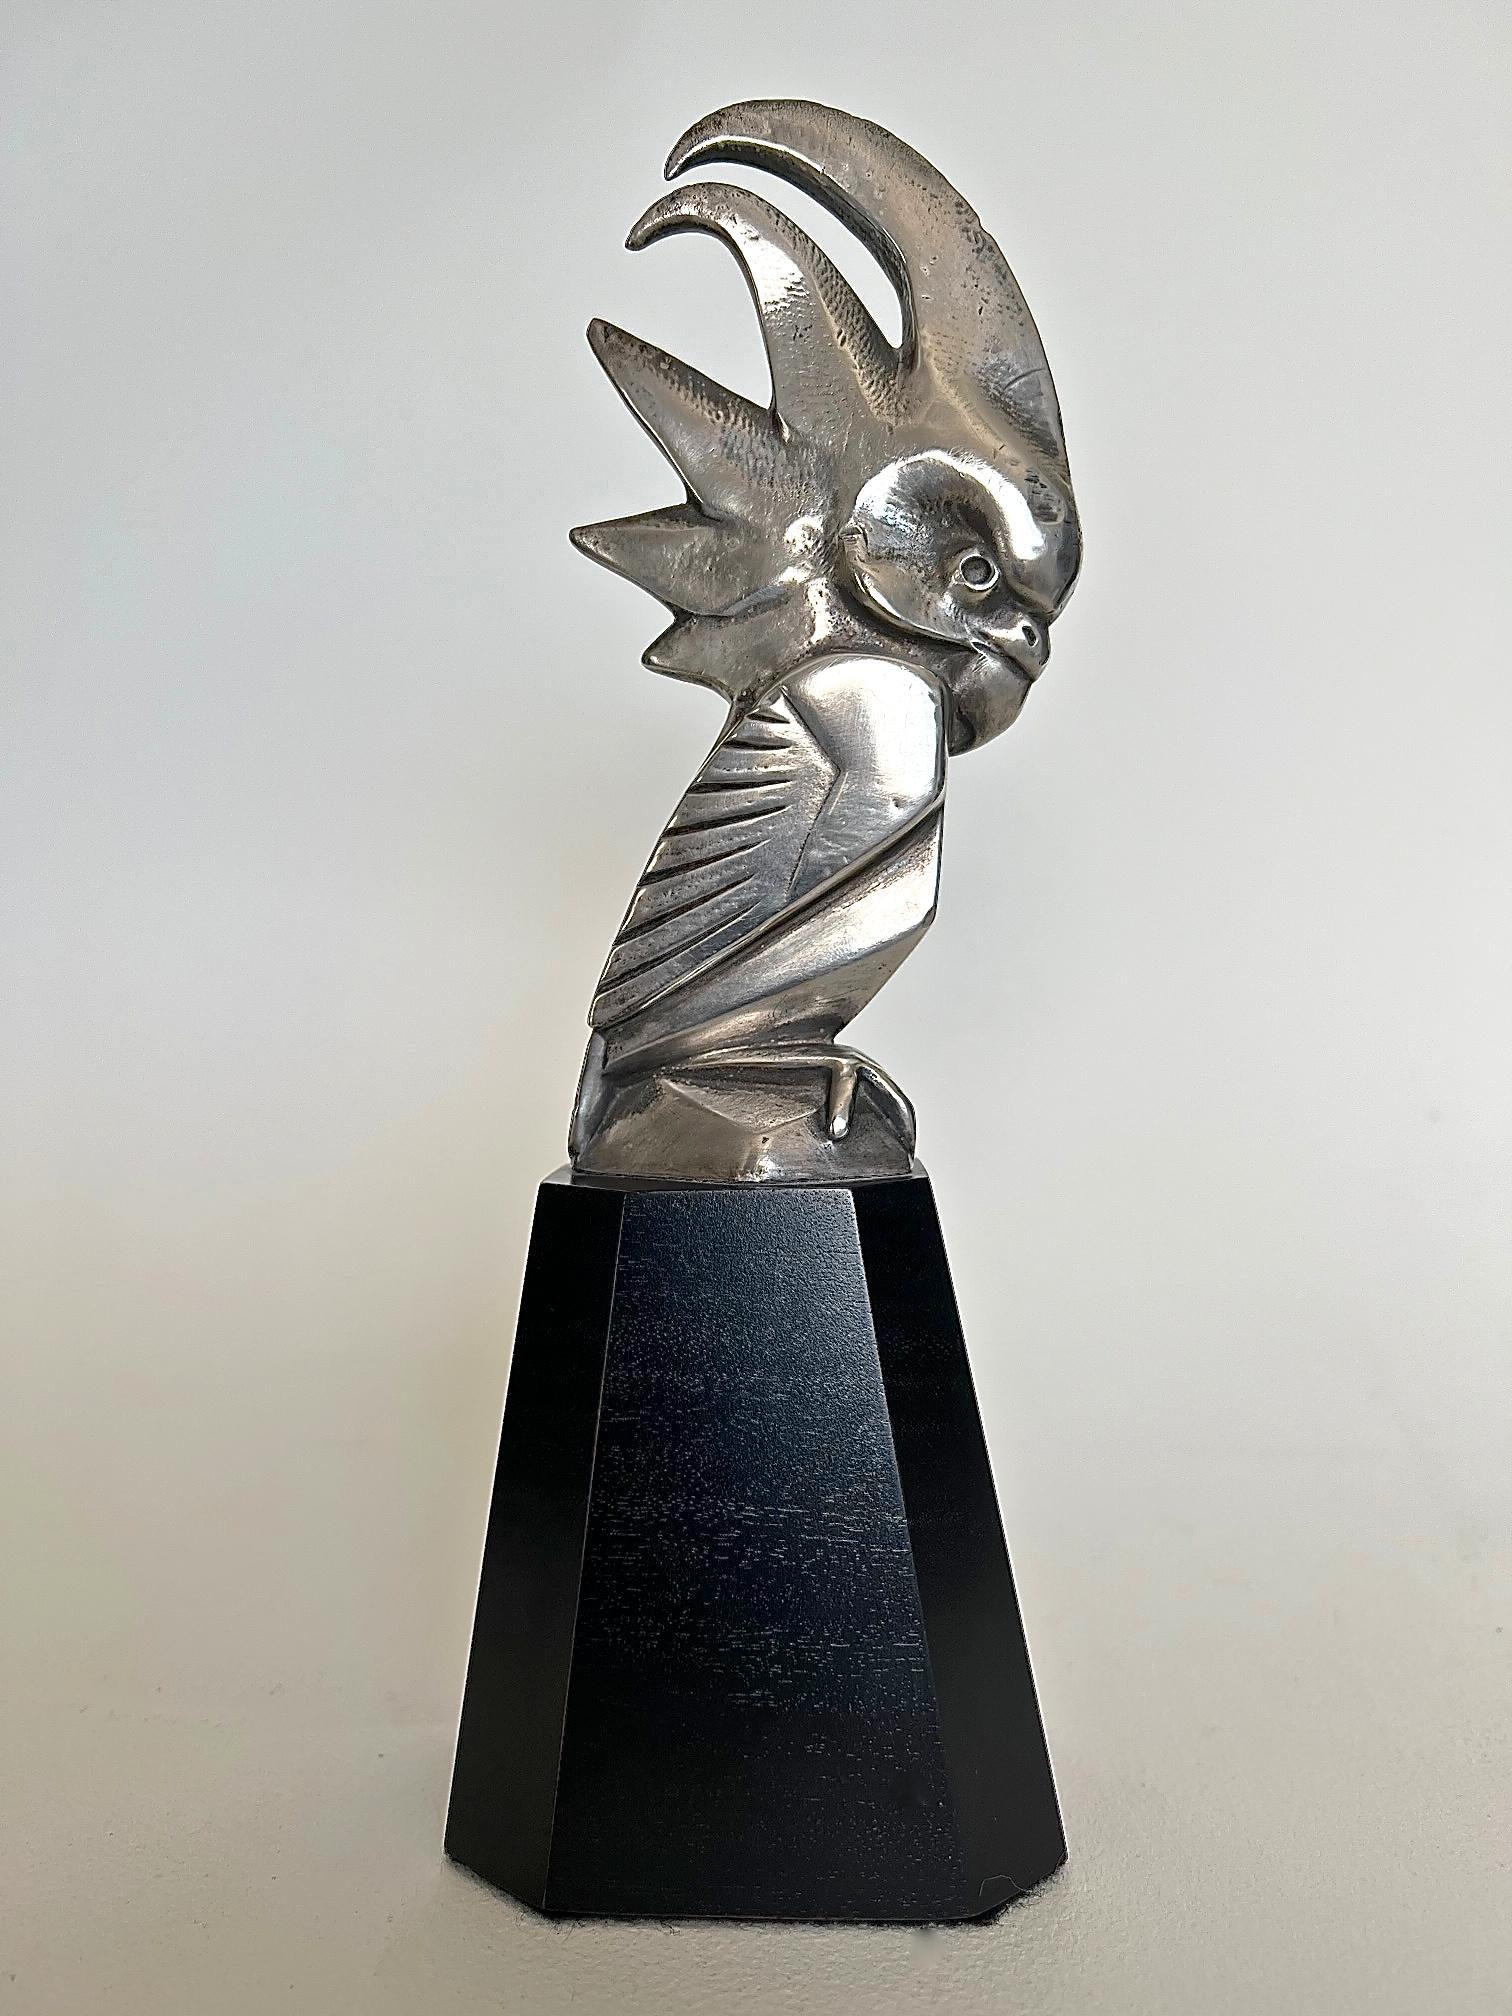 A rare silvered bronze car mascot / hood ornament modeled as a stylised cockatoo. Mounted on a custom made polygonal wooden base. Signed in the bronze 